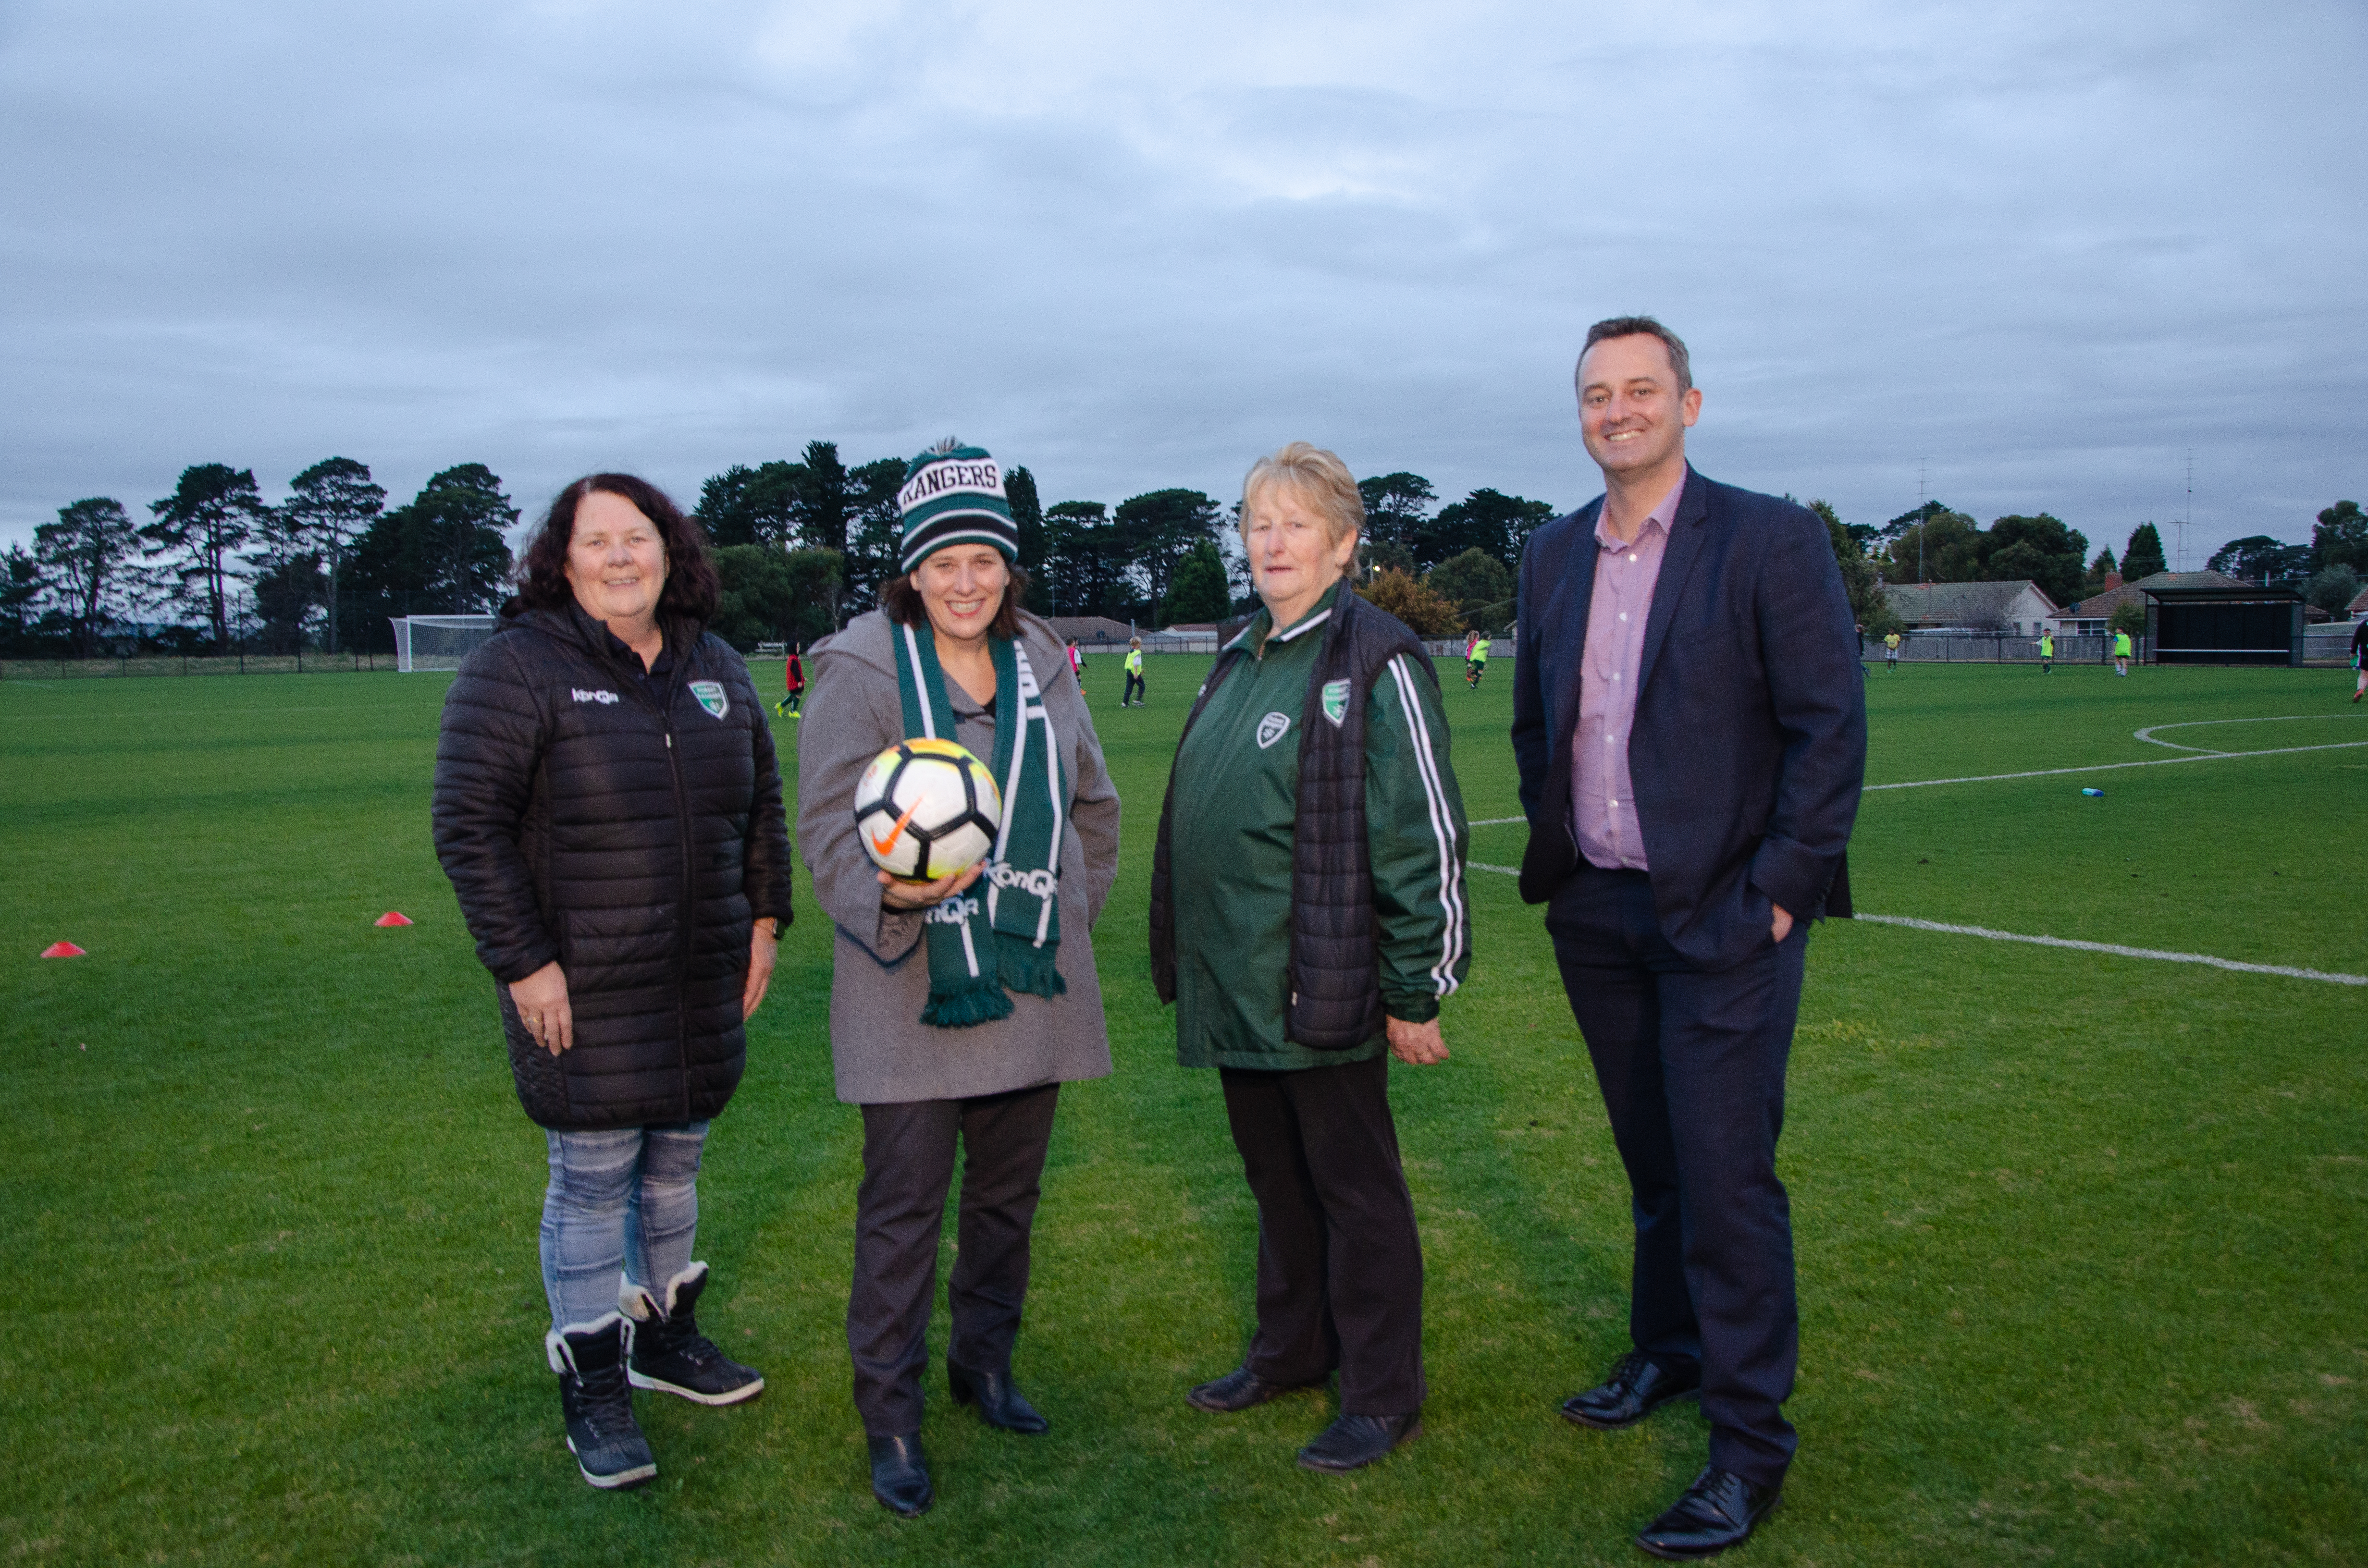 Local Soccer Club representatives with Mayor Moloney and MP Addison